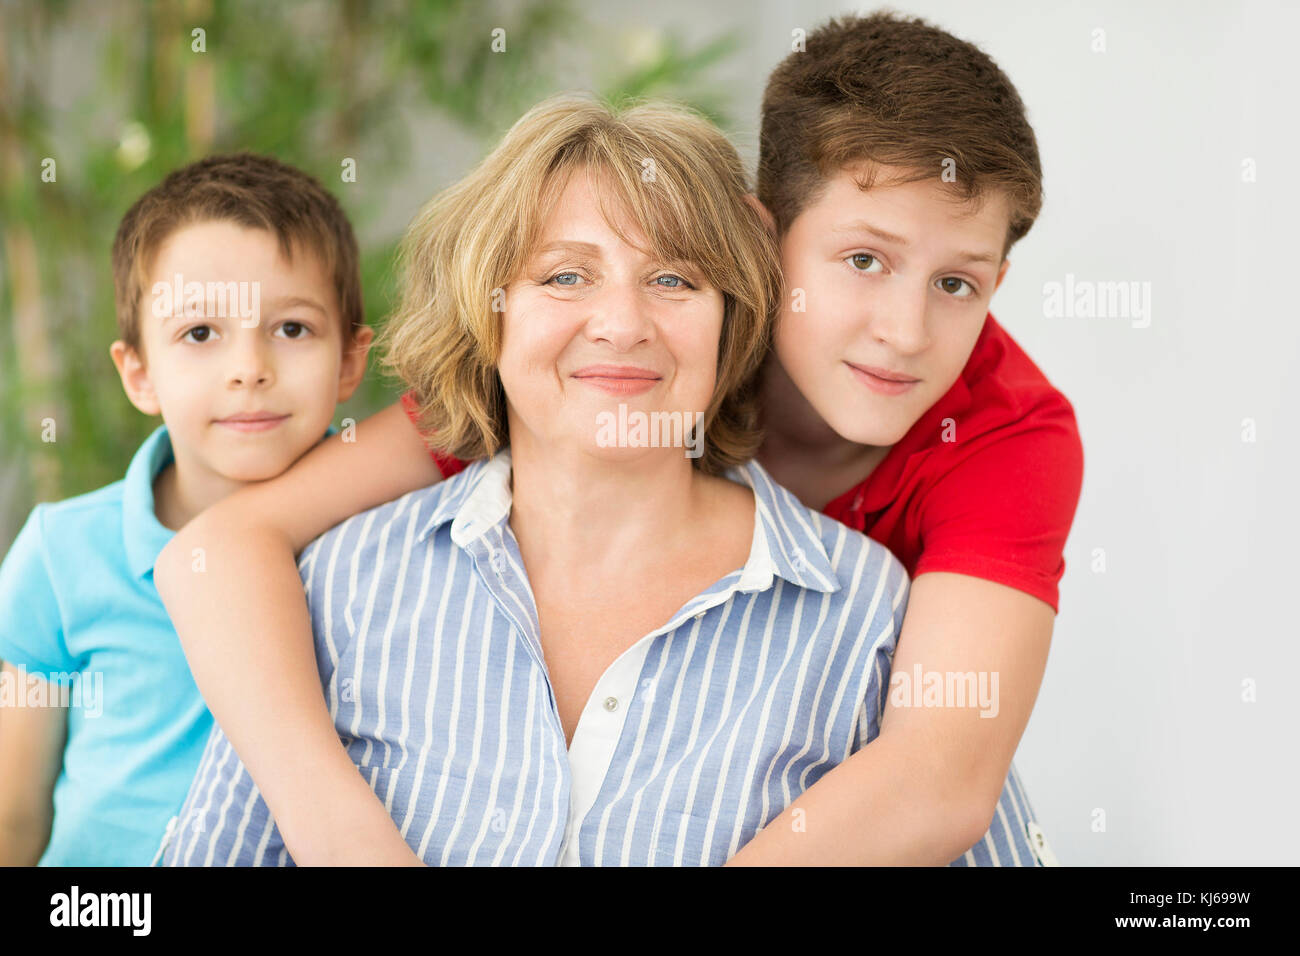 Mid-age woman with two young boys indoors. Family concept Stock Photo